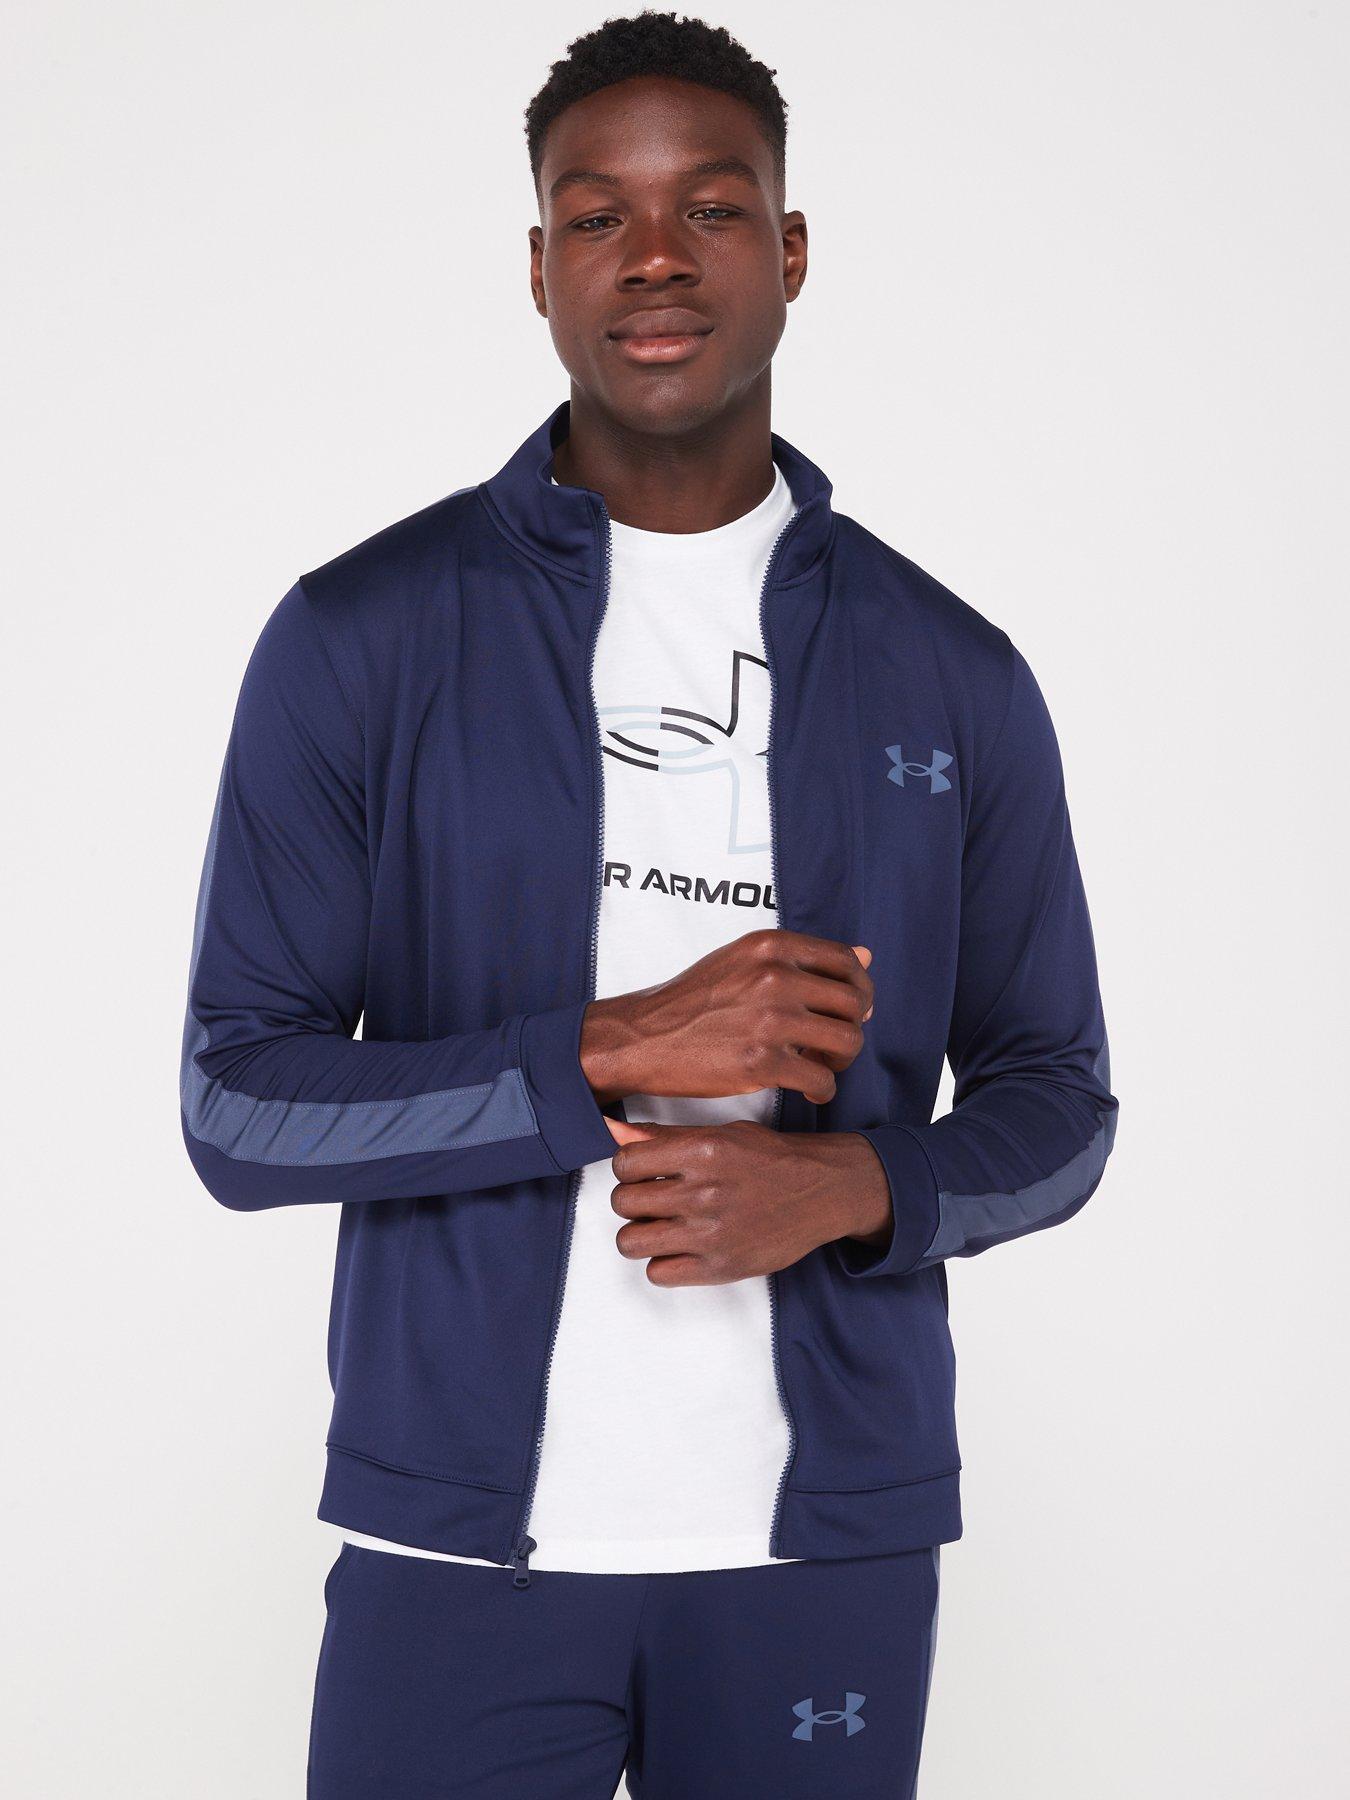 UNDER ARMOUR Men's Training Knit Tracksuit - Navy/Grey | Very.co.uk